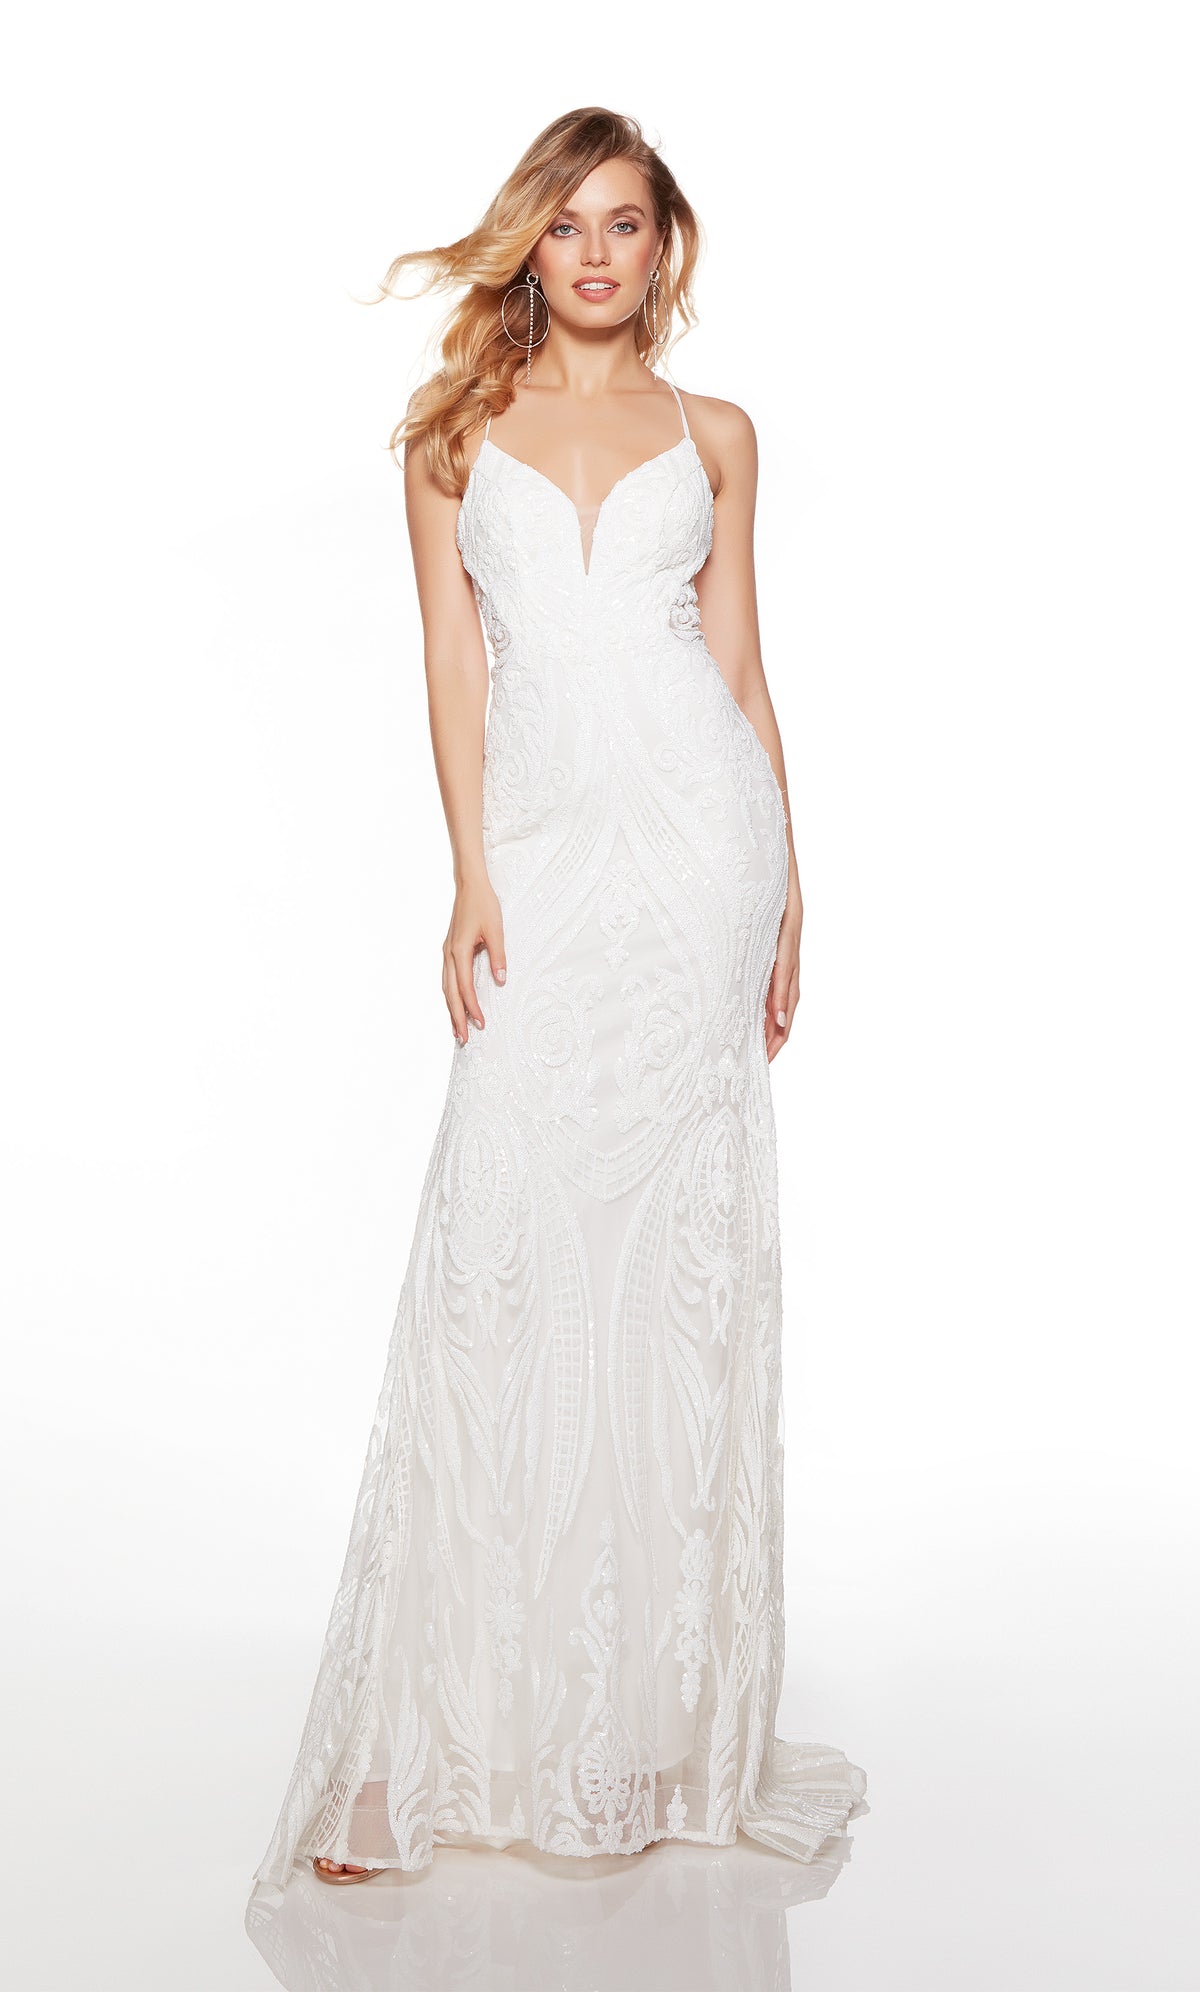 Sexy white sequin gown with a plunging neckline and sequin detail throughout.